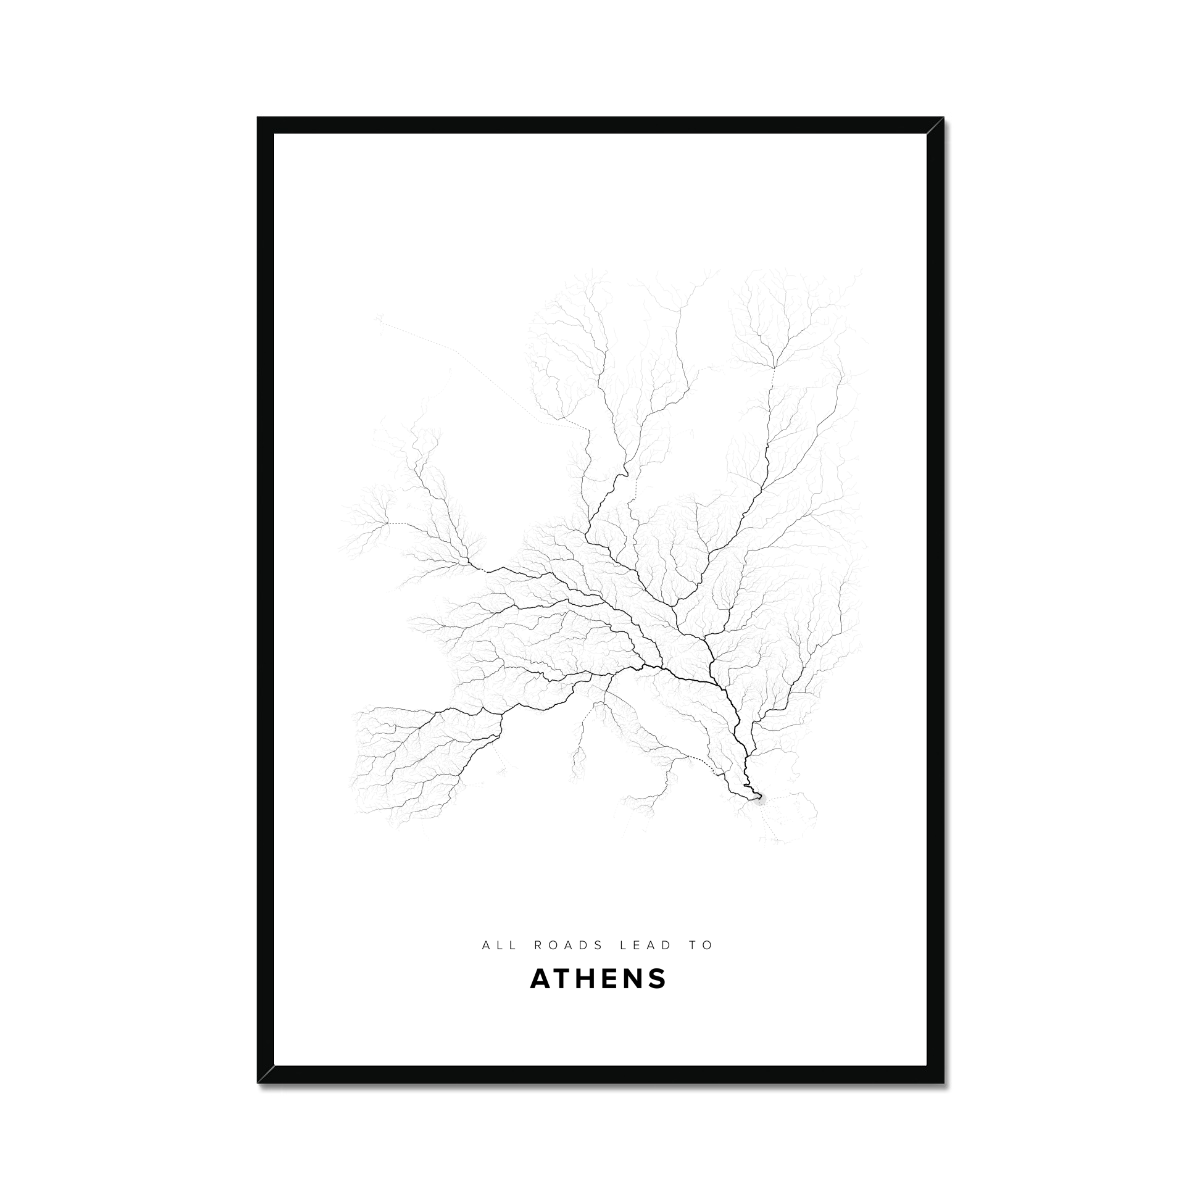 All roads lead to Athens (Greece) Fine Art Map Print